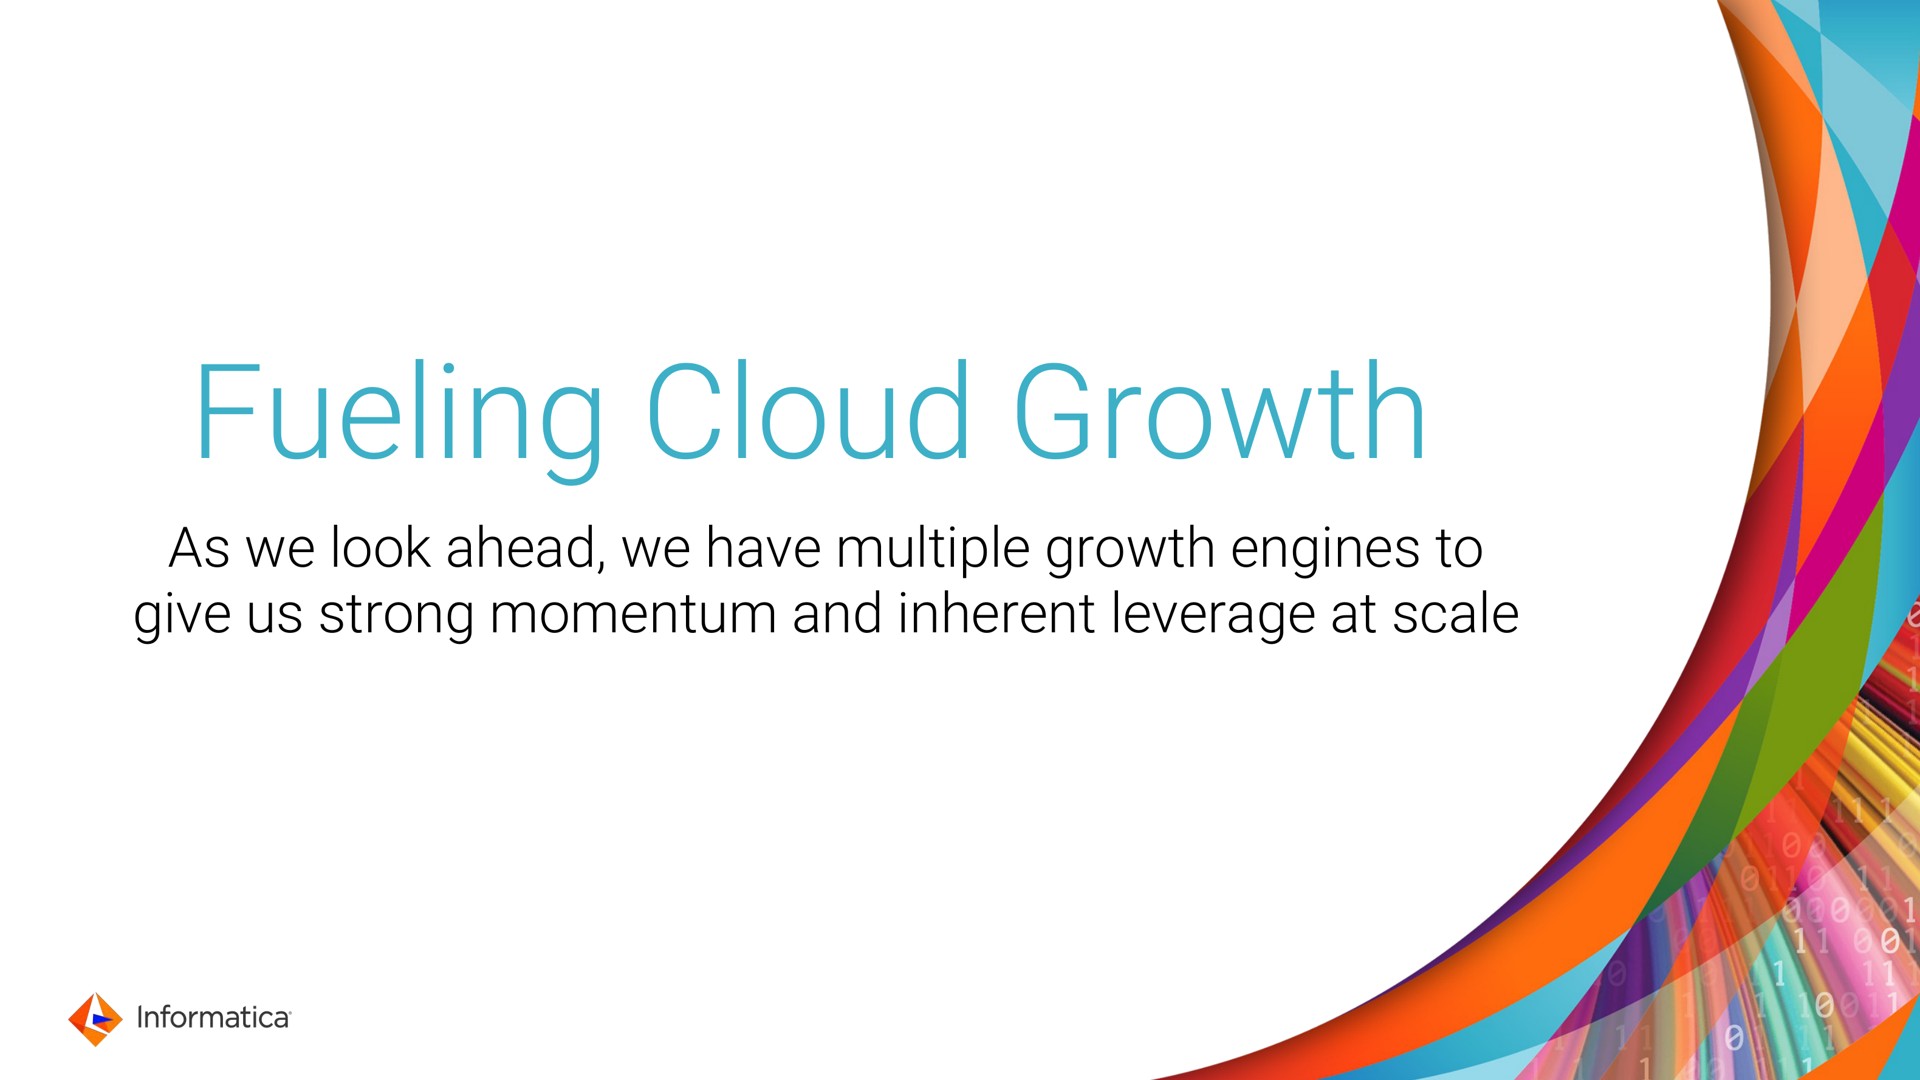 fueling cloud growth as we look ahead we have multiple growth engines to give us strong momentum and inherent leverage at scale | Informatica